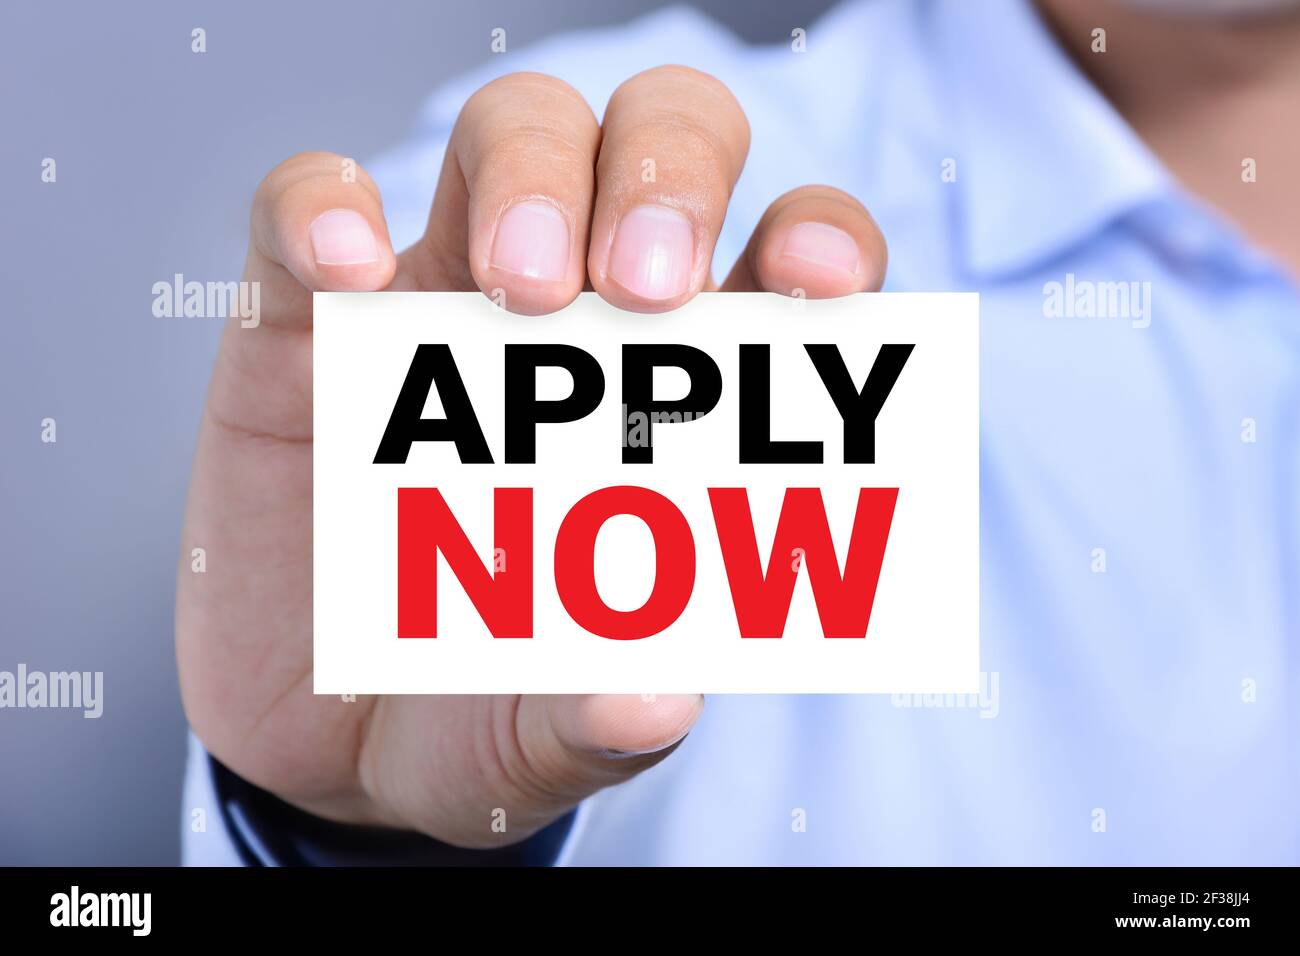 APPLY NOW, message on business card shown by a man Stock Photo